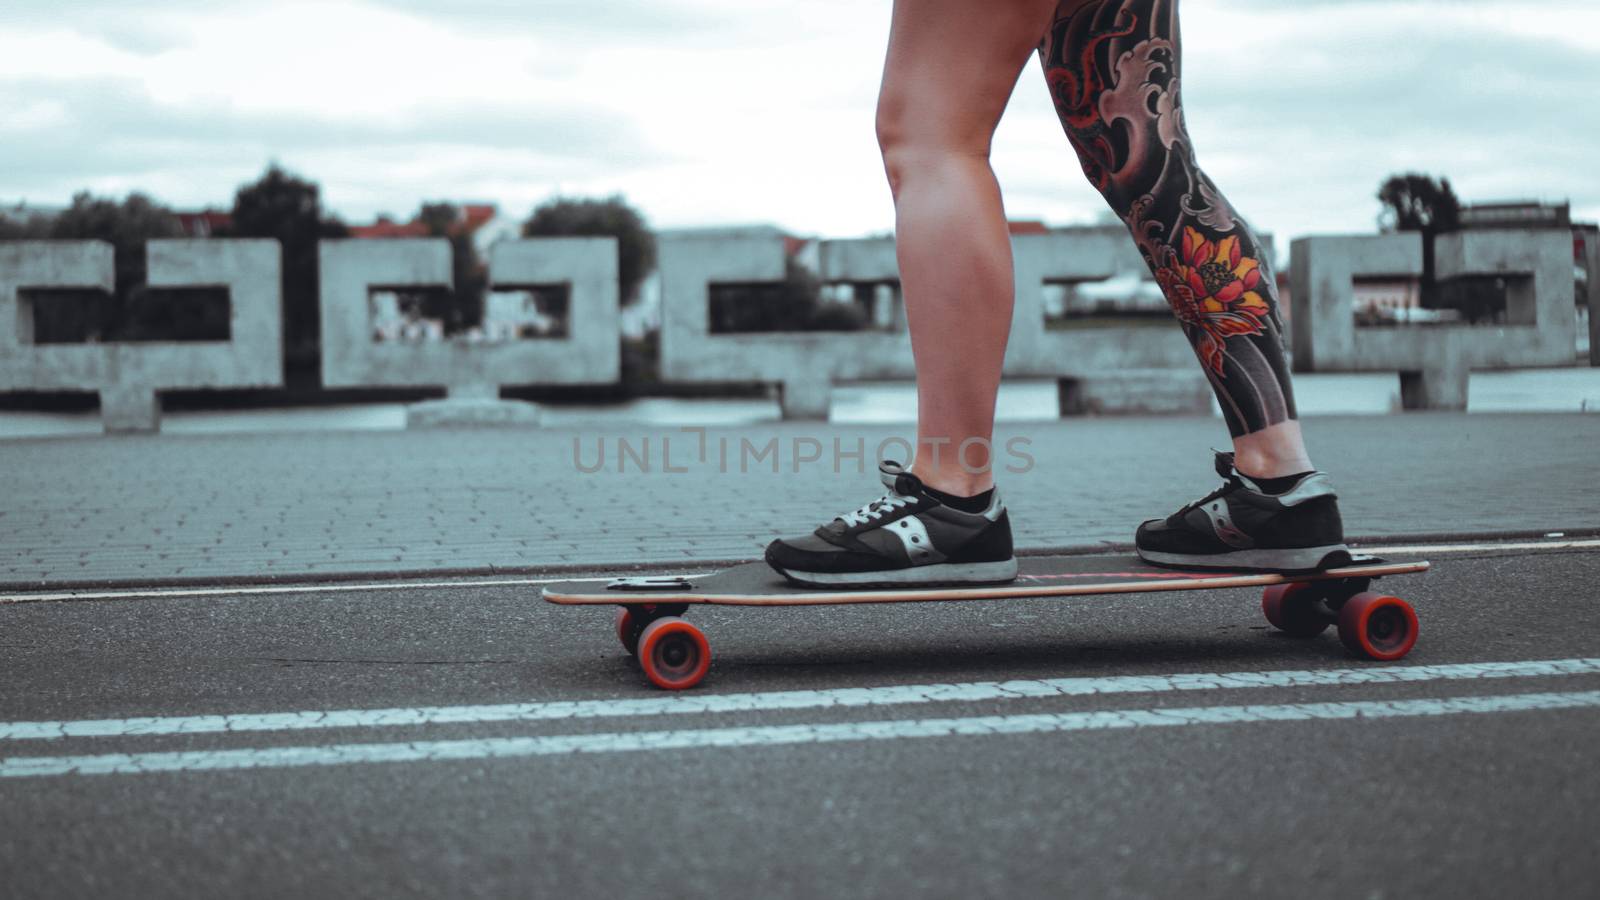 Beautiful young girl with tattoos with longboard in the town. She has traditional japanese tattoo